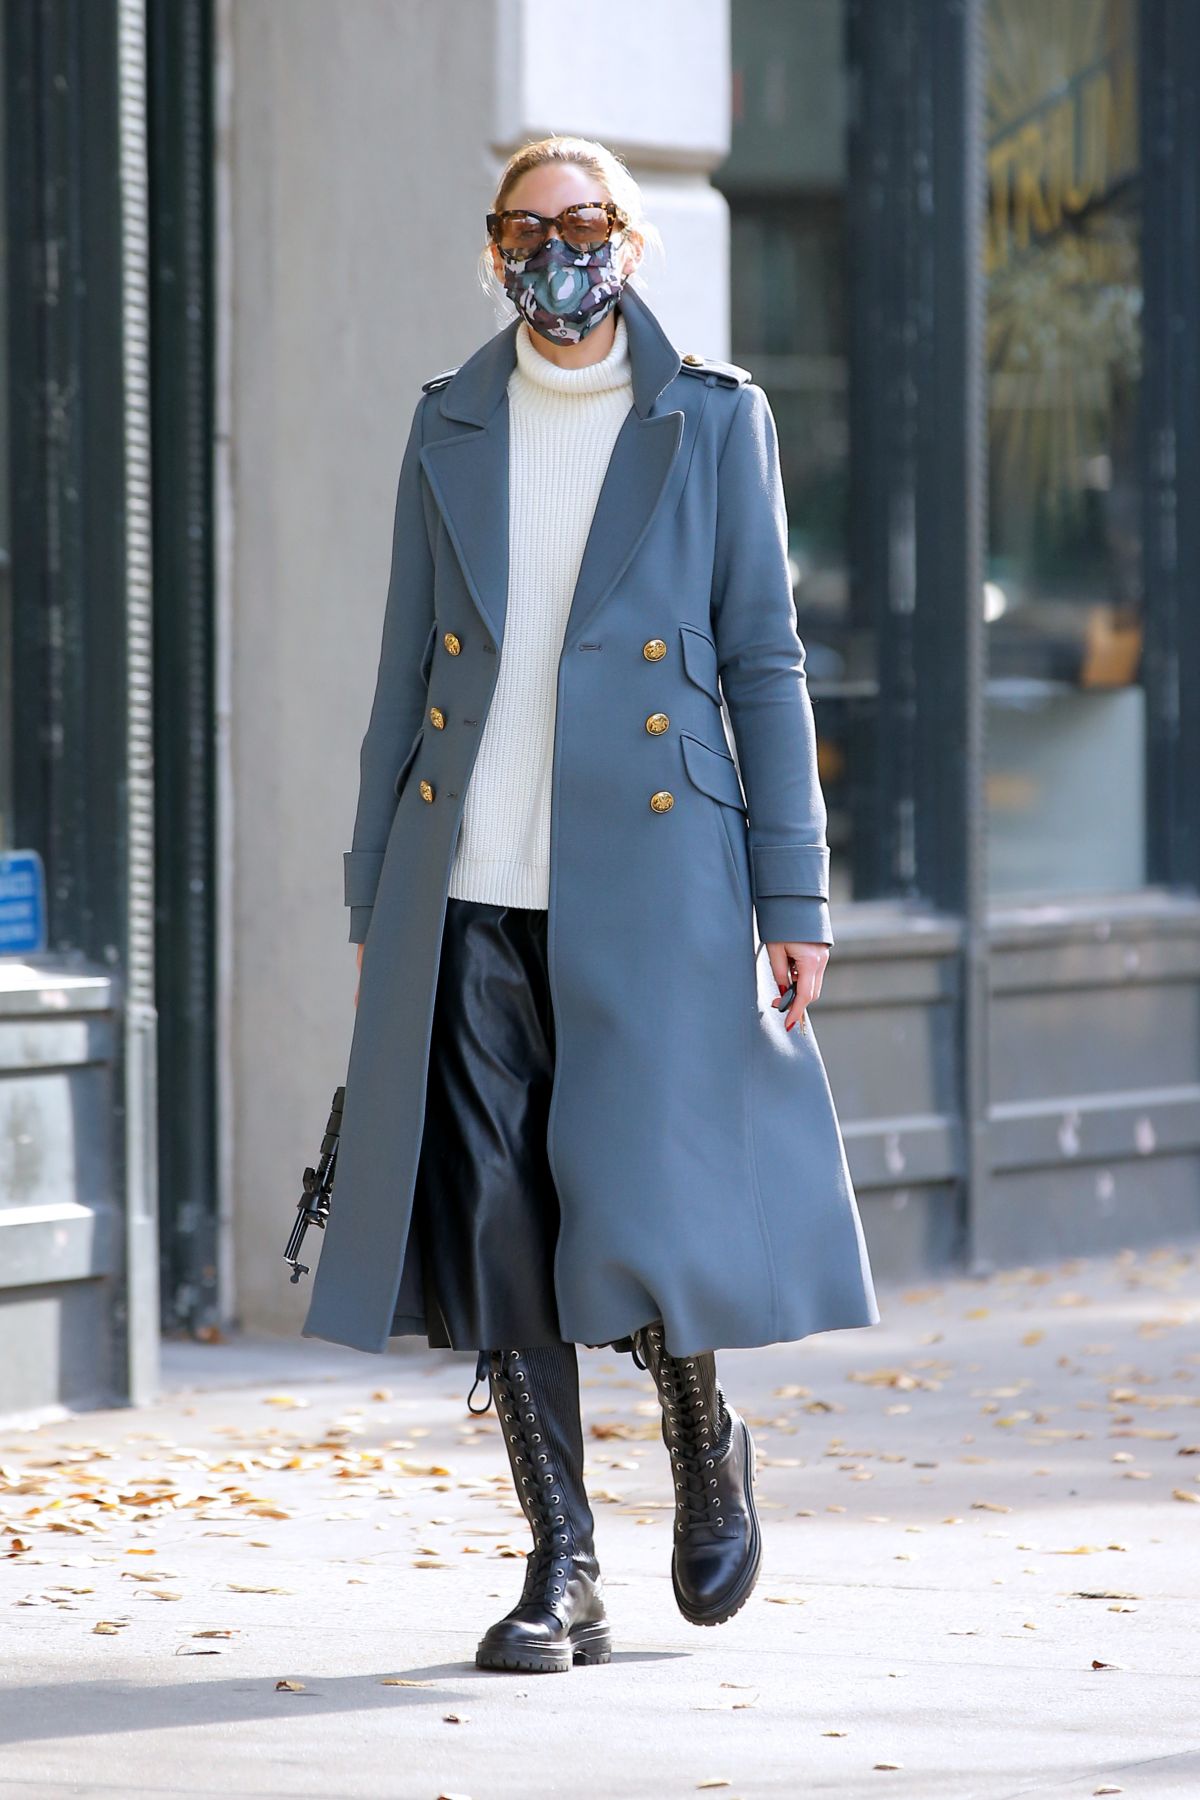 olivia-palermo-wearing-a-mask-out-in-new-york-12-13-2020-3.jpg